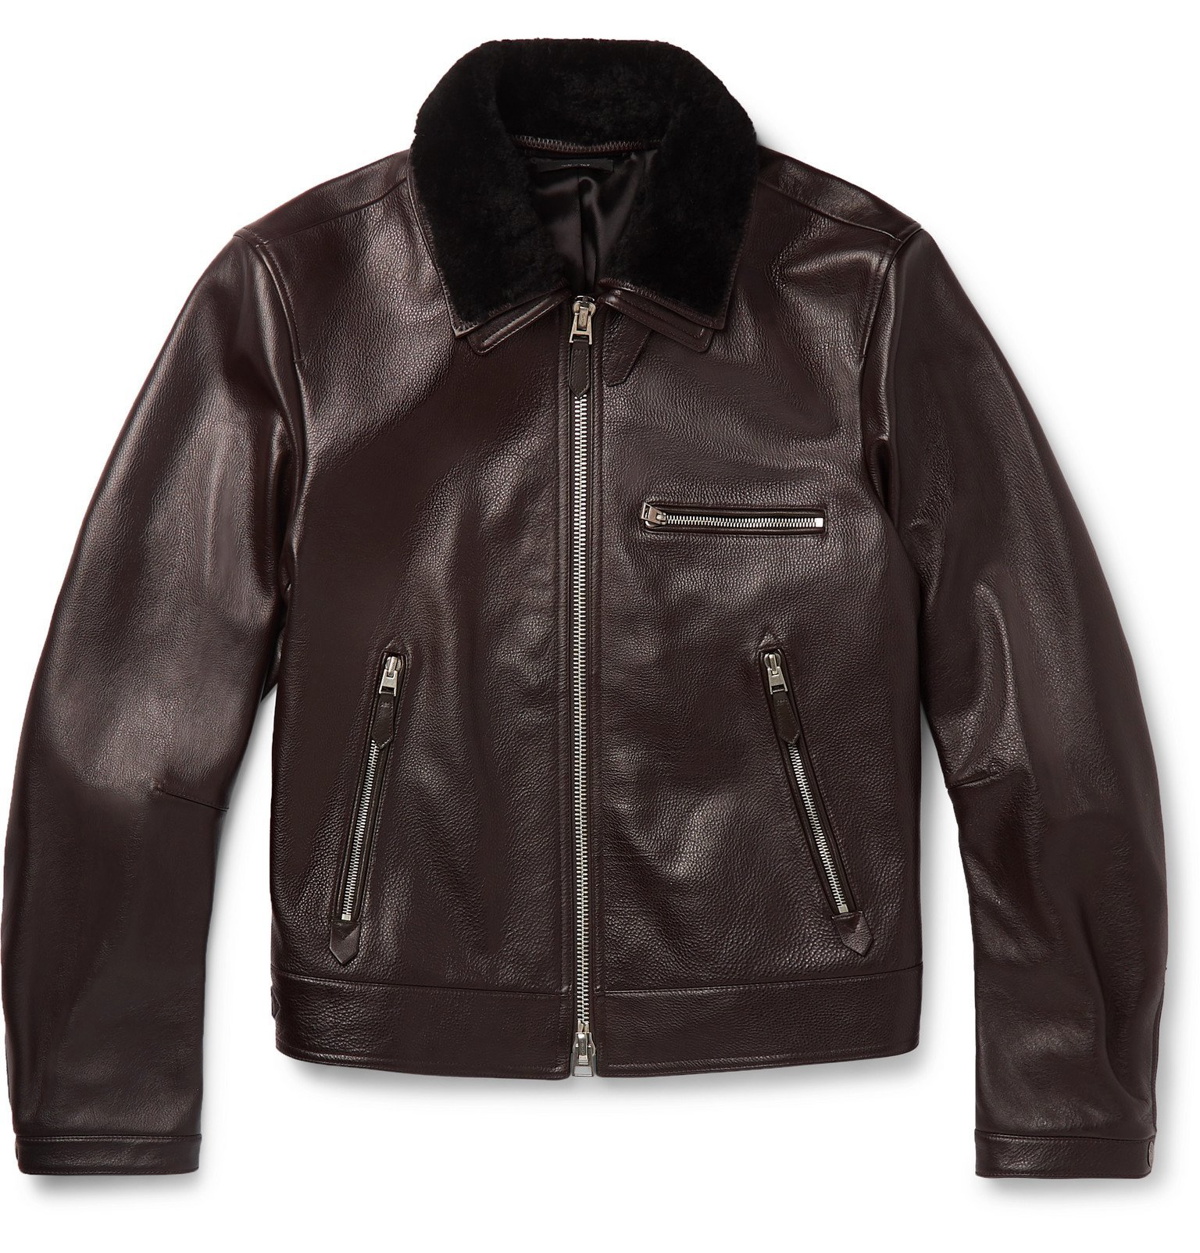 TOM FORD - Slim-Fit Shearling-Trimmed Full-Grain Leather Jacket - Brown ...